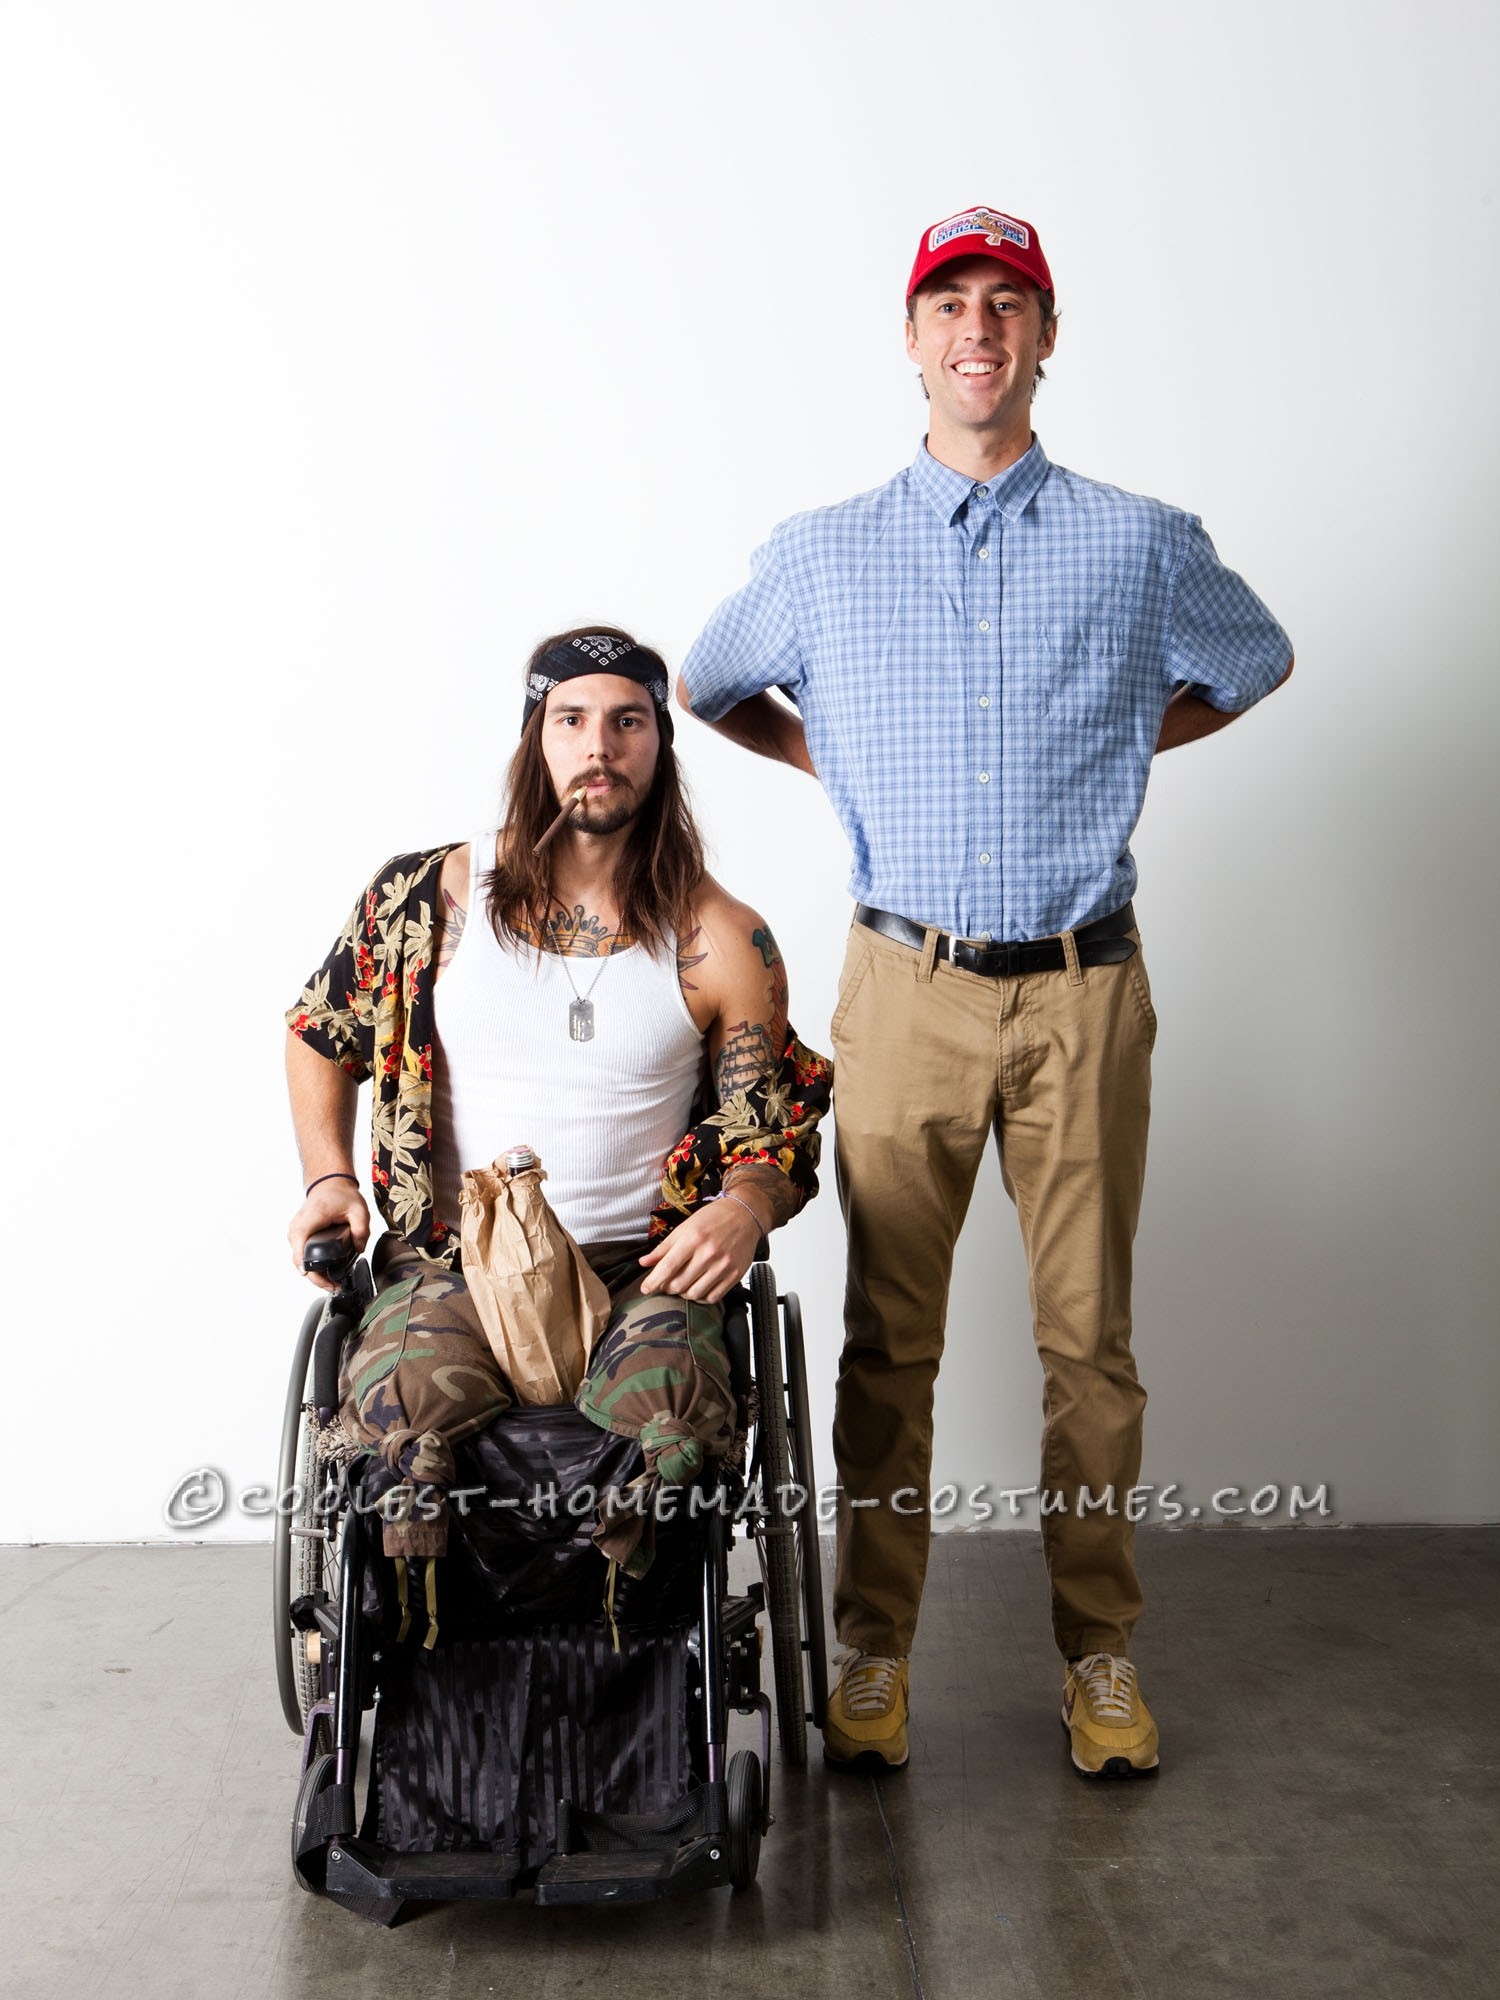 Lt. Dan and Forrest Gump Take Halloween by Storm